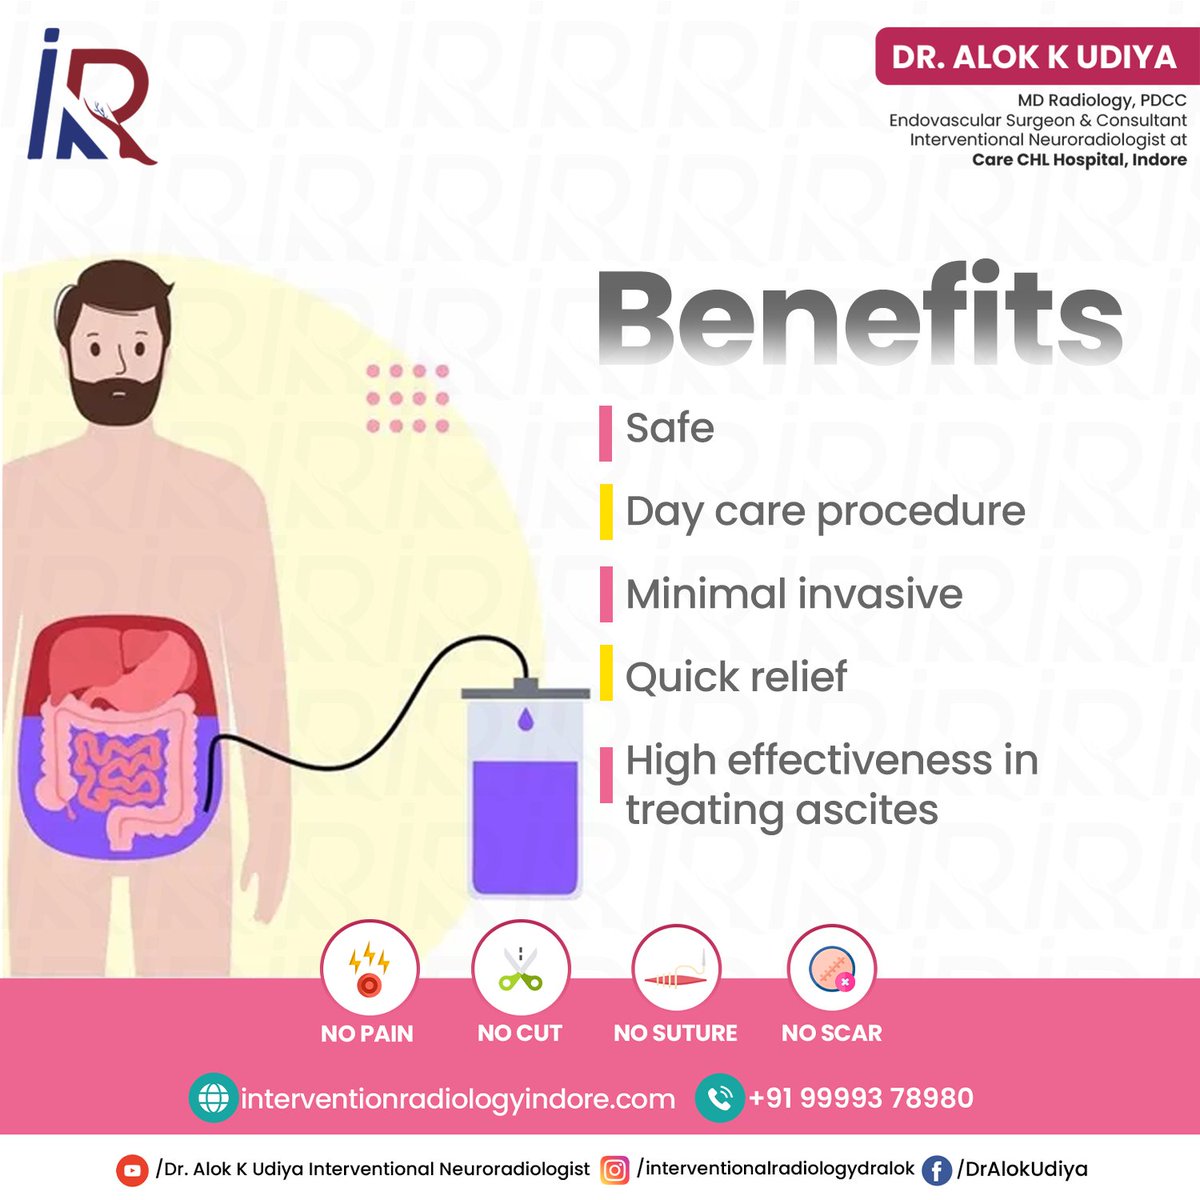 Did you know that Ascites Tap, also known as paracentesis or abdominocentesis, is a procedure used to remove fluid buildup in the abdomen 👨‍⚕️ Schedule an appointment with Dr. Alok K Udiya: +91 99993 78980 Or visit 📍 Care CHL Hospital interventionradiologyindore.com #dralok#dralokkudiya